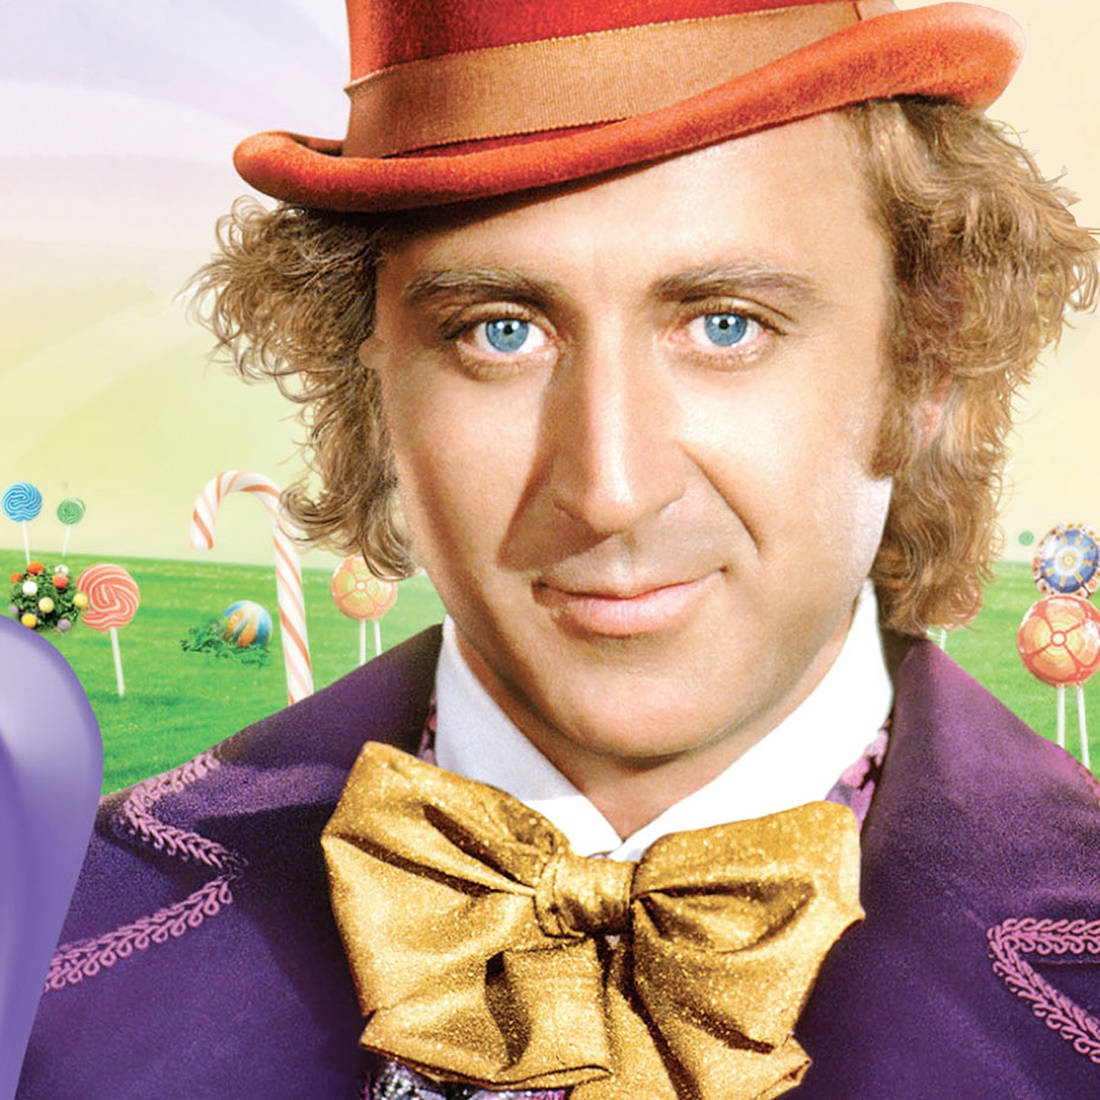 Genewilder Willy Wonka And The Chocolate Factory Translates To 